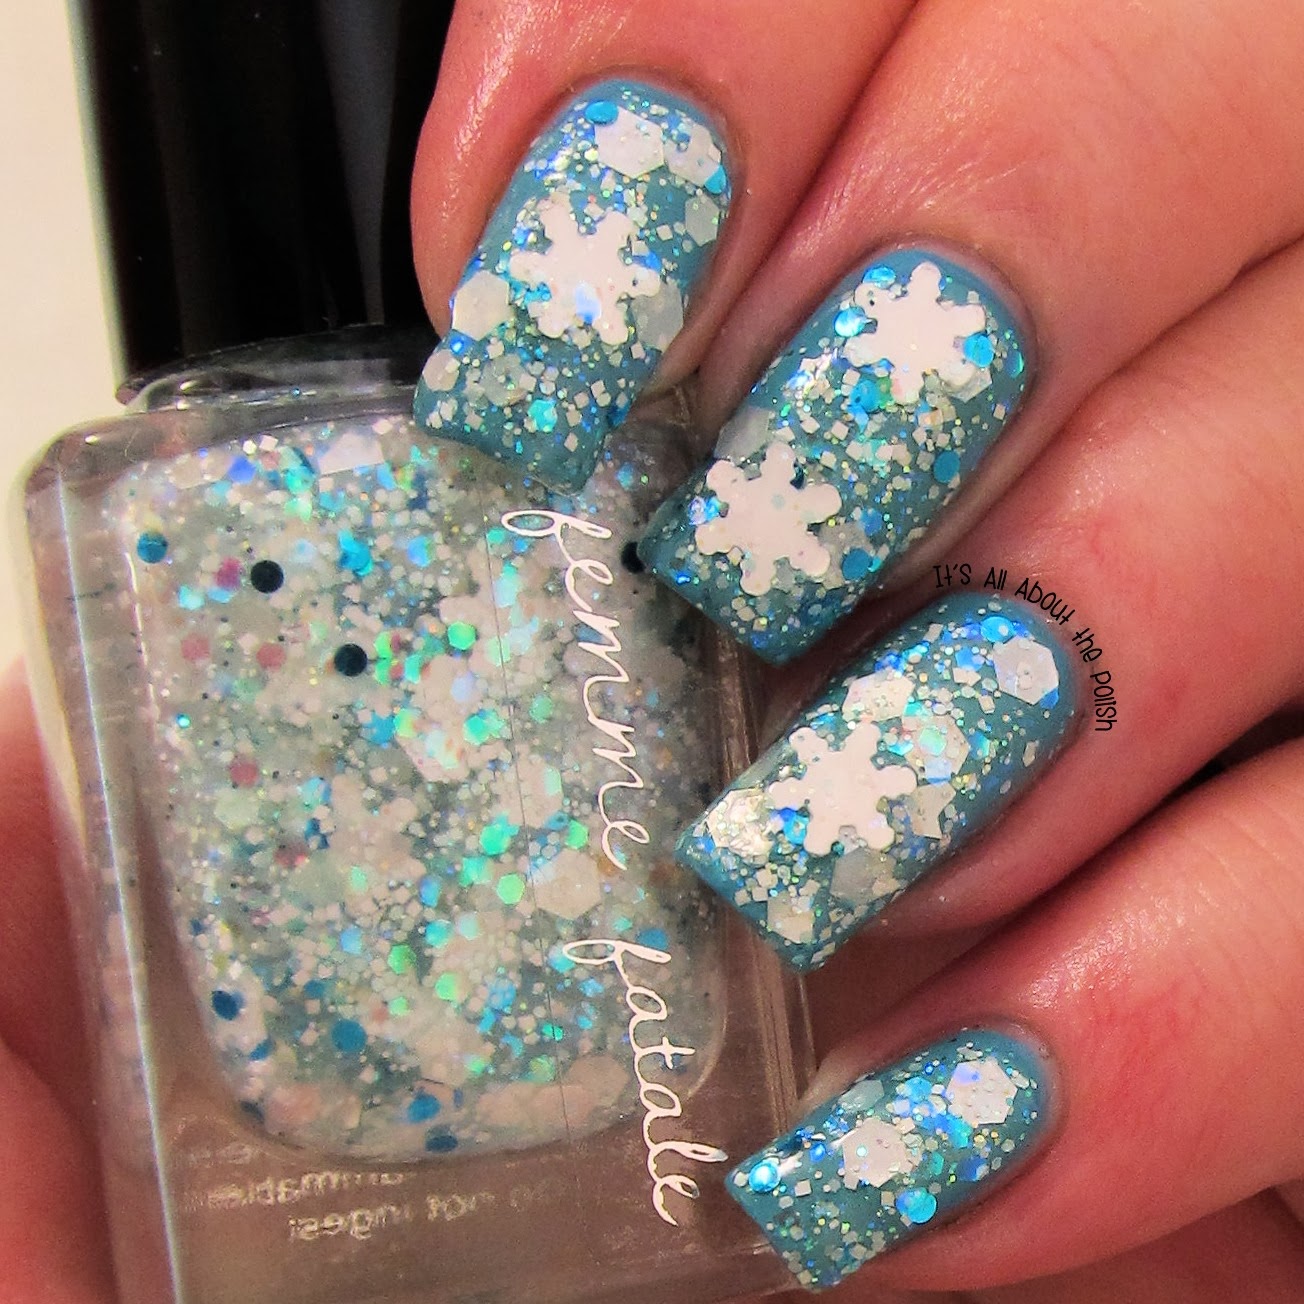 It's all about the polish: Femme Fatale Cosmetics - A Frosty Shake